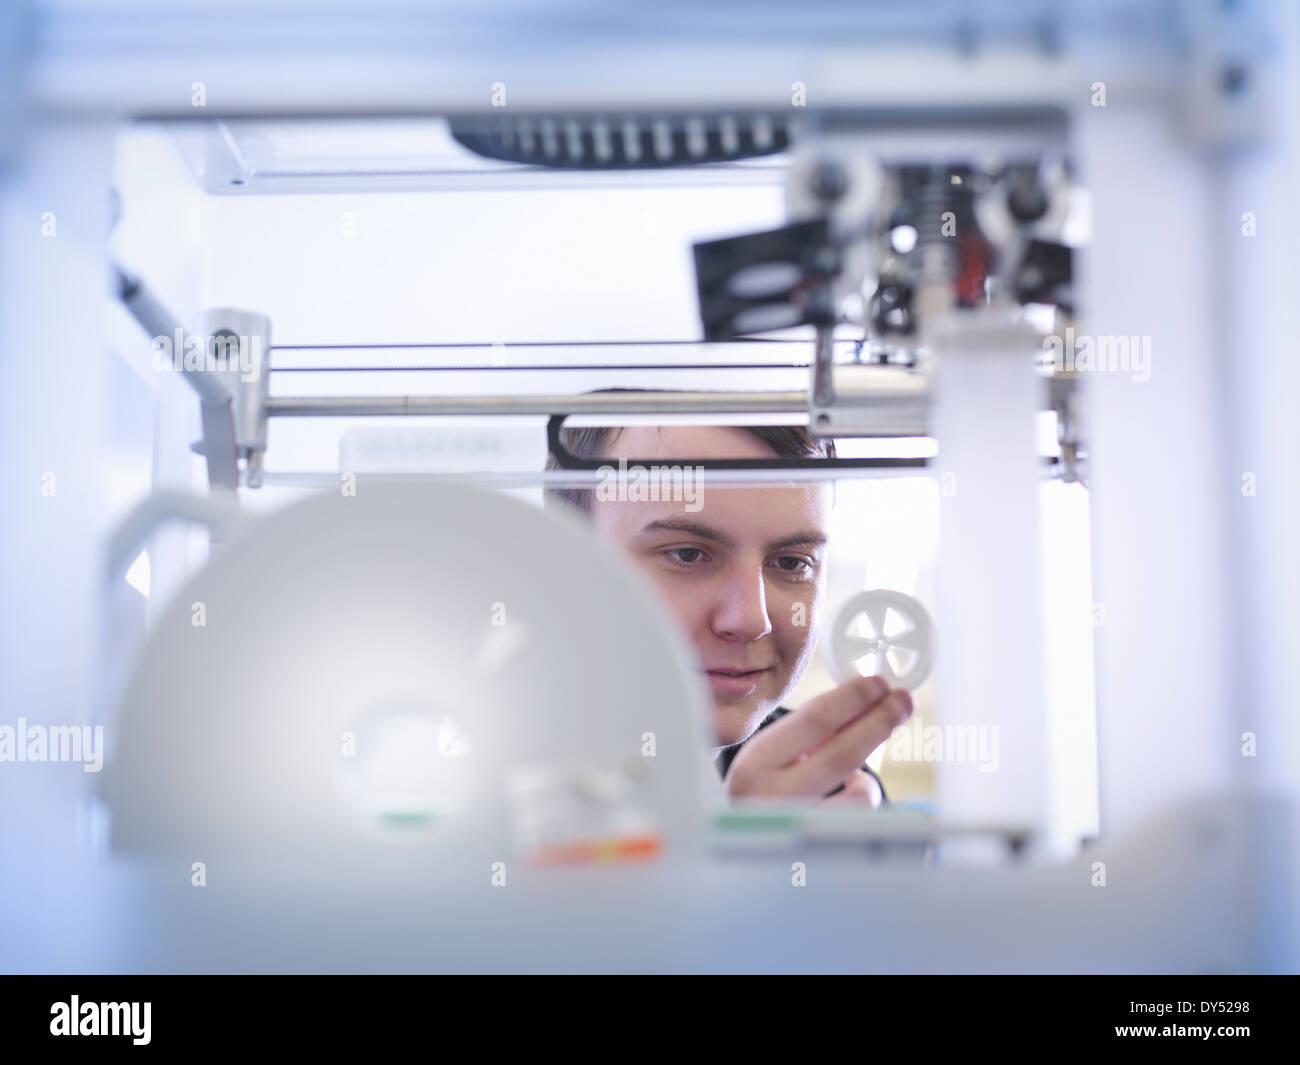 Apprentice with 3D printed part, close up Stock Photo